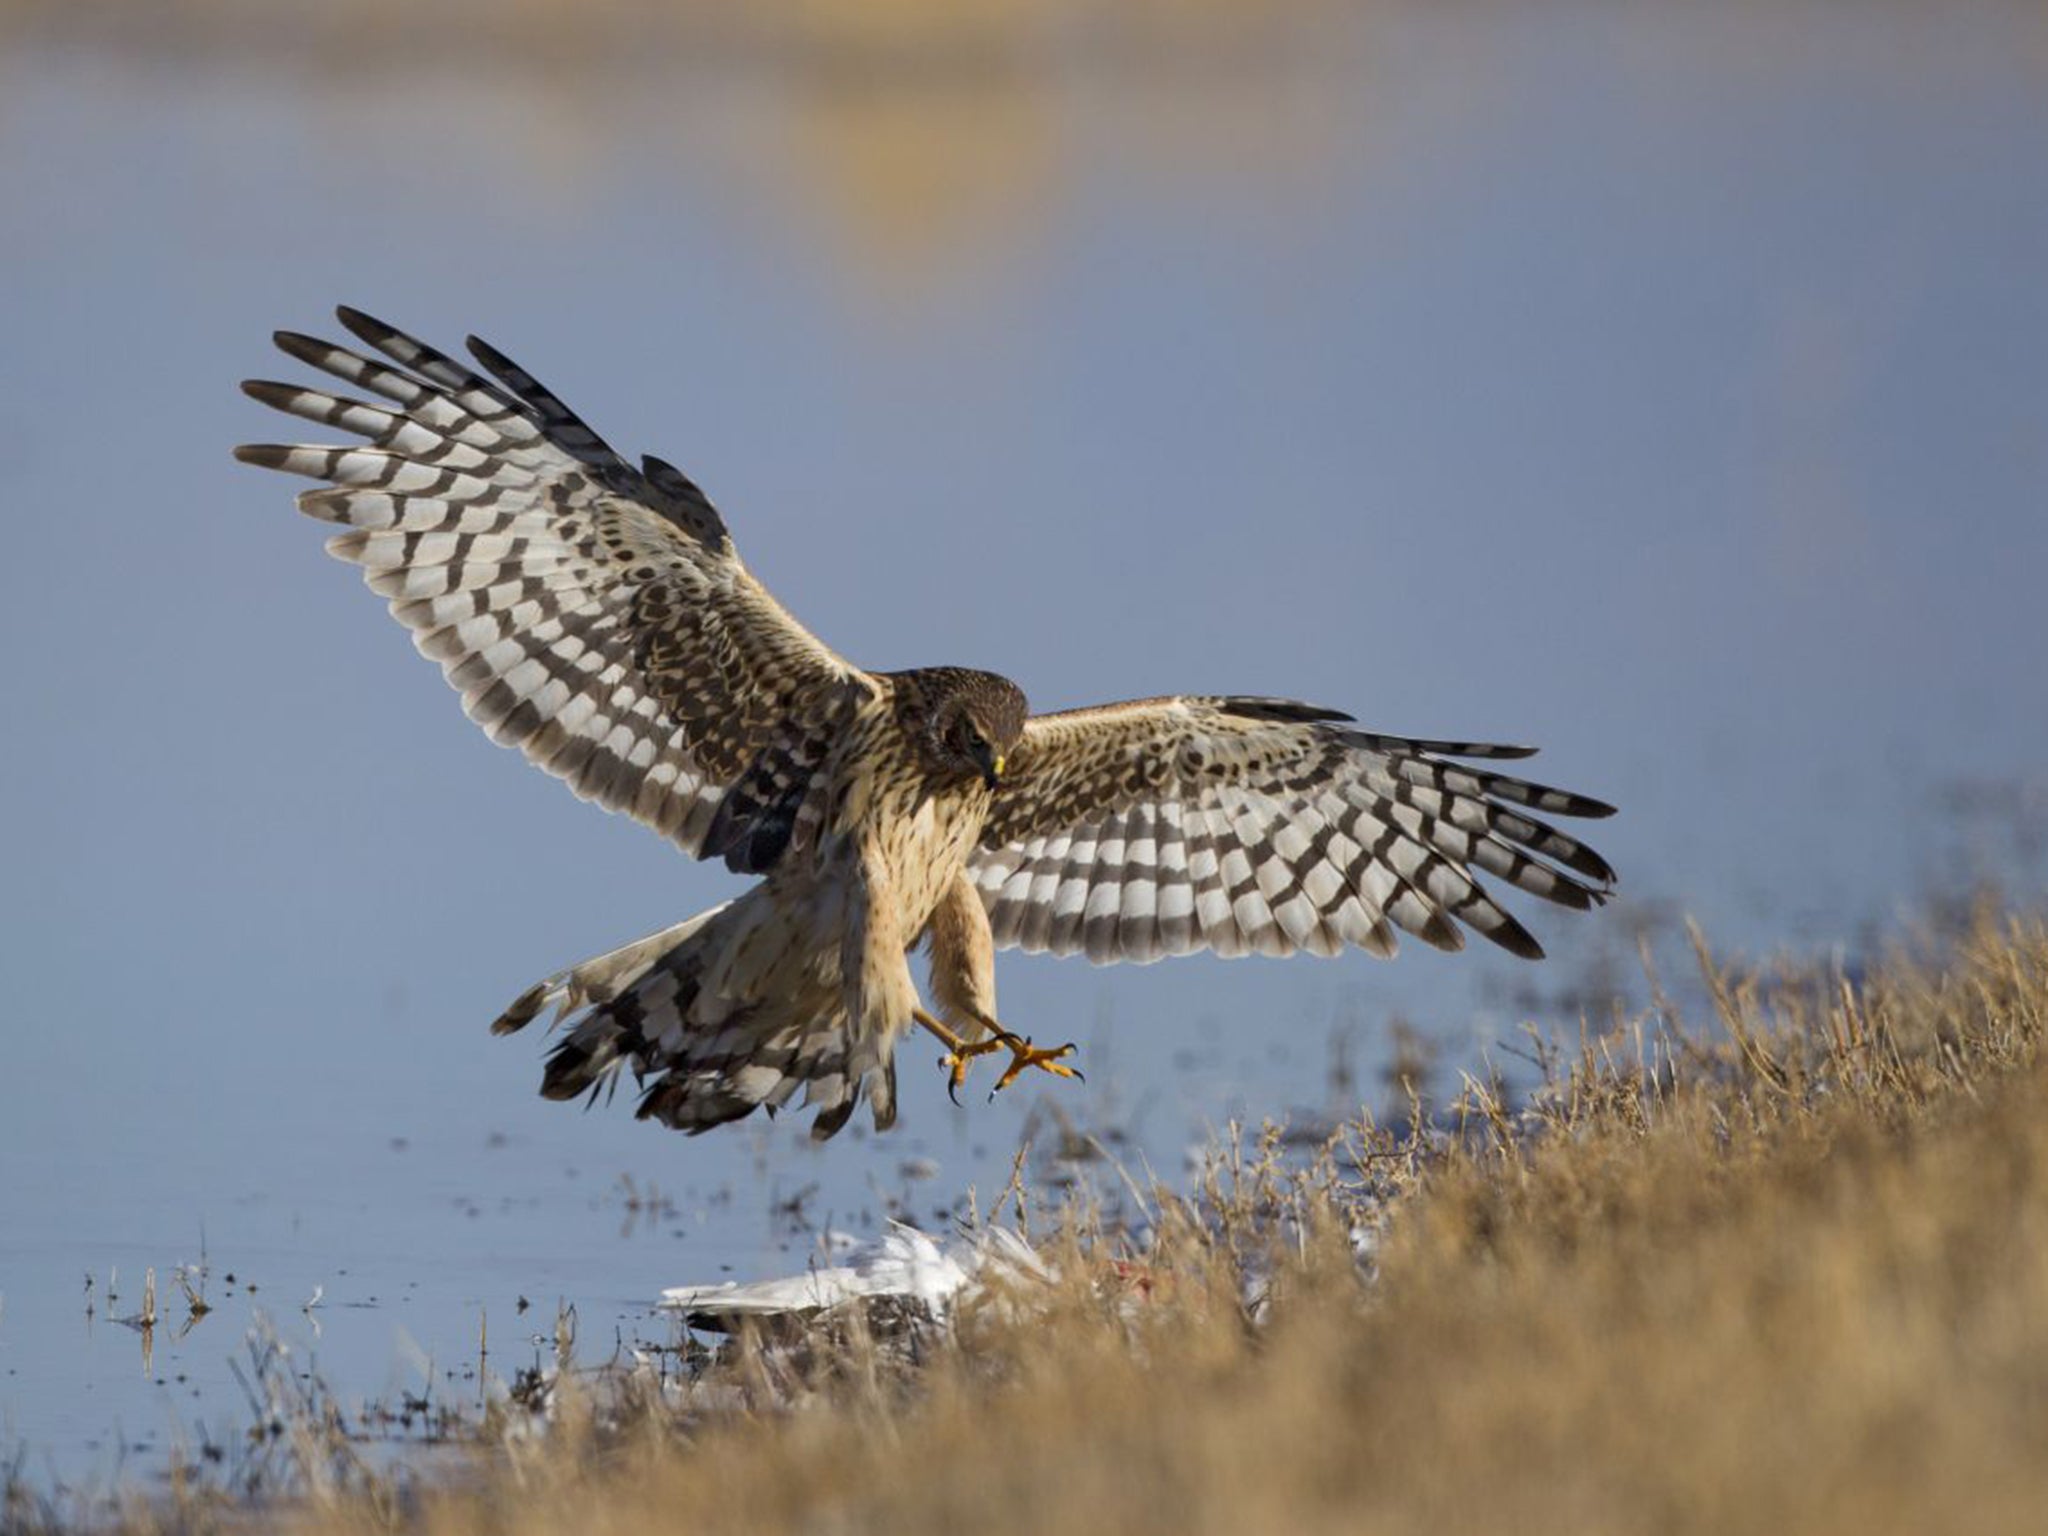 Only three or four pairs of Hen Harriers remain in England and Wales